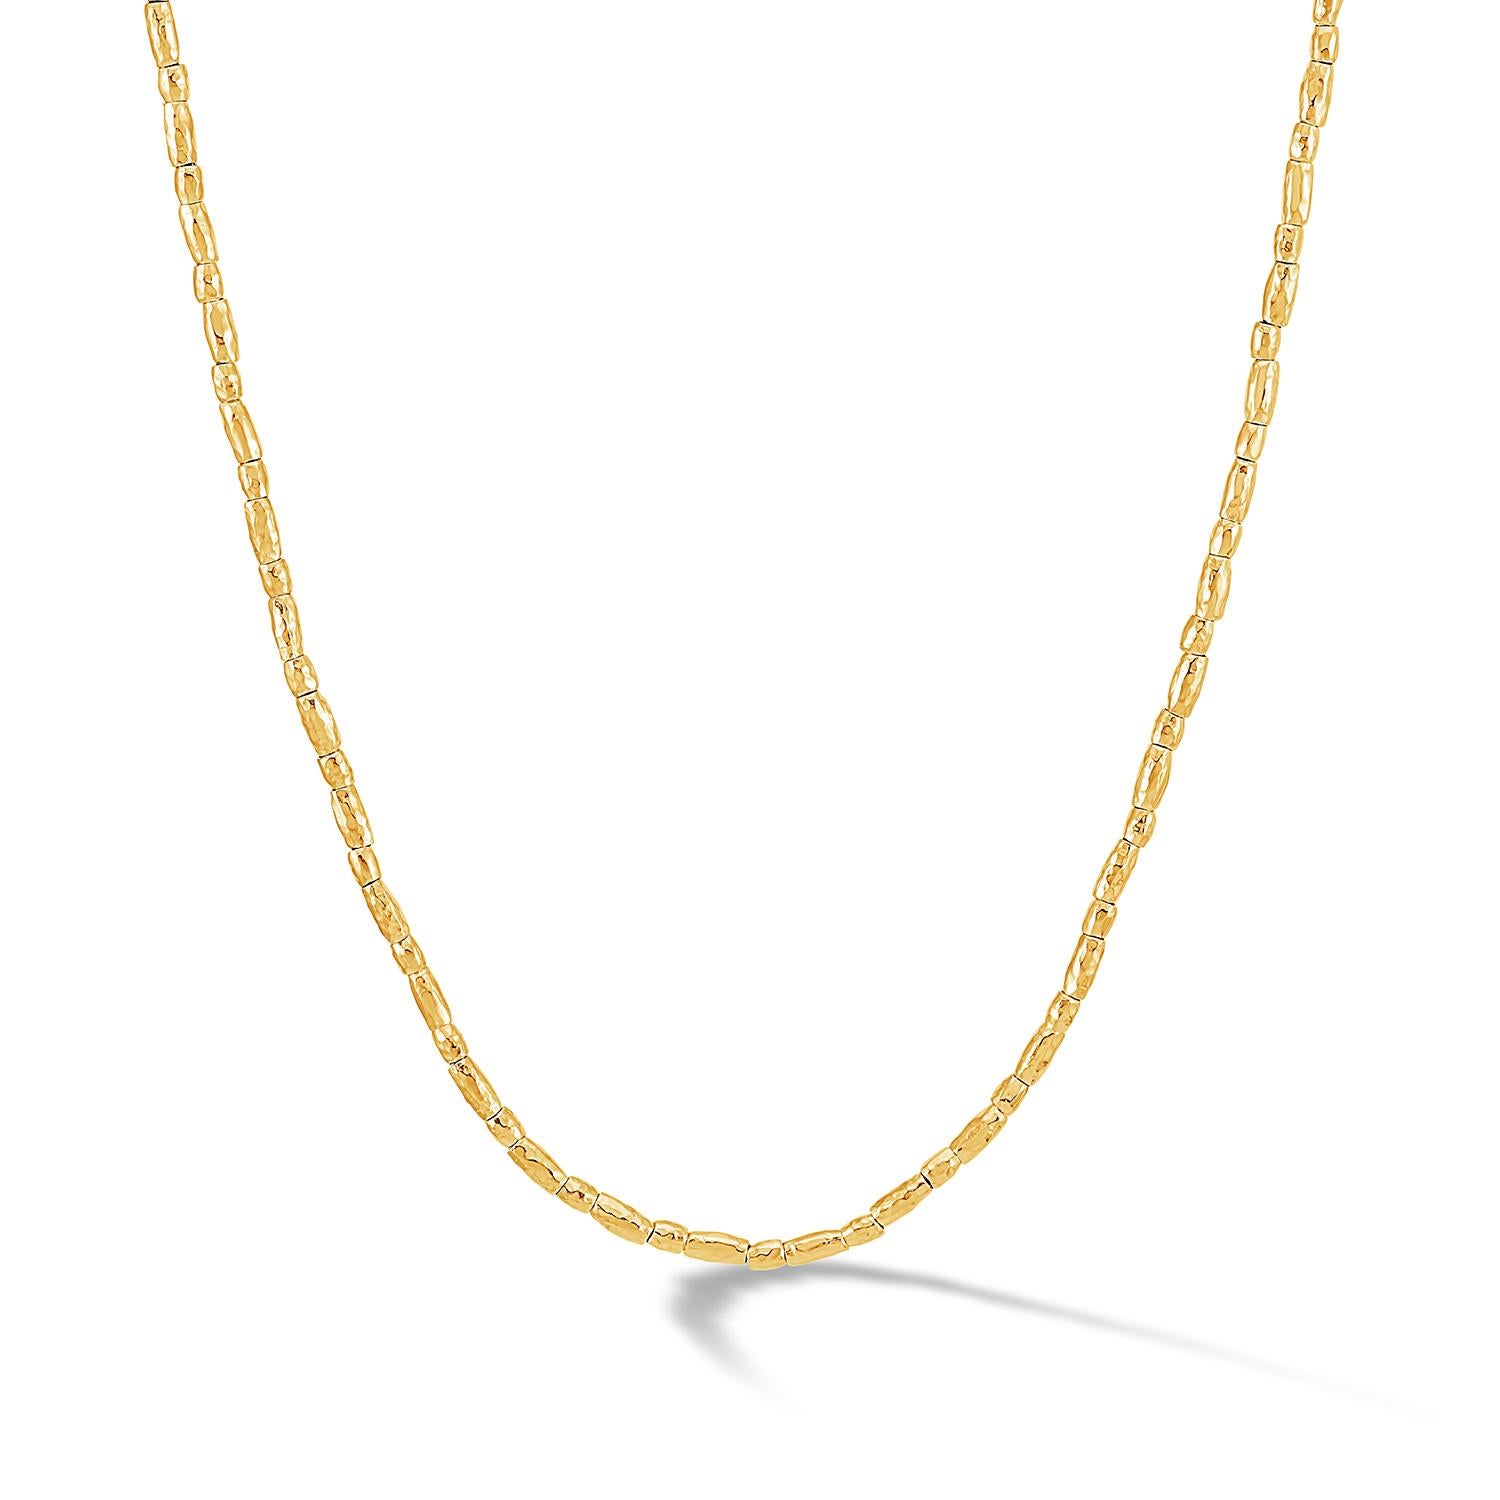 18ct yellow gold vermeil on a sterling silver necklace made of caraway 'rice' cylinder beads threaded onto chain. The necklace is finished with our signature hammered loop and t-bar clasp.

We have been creating a wonderful world of everyday and